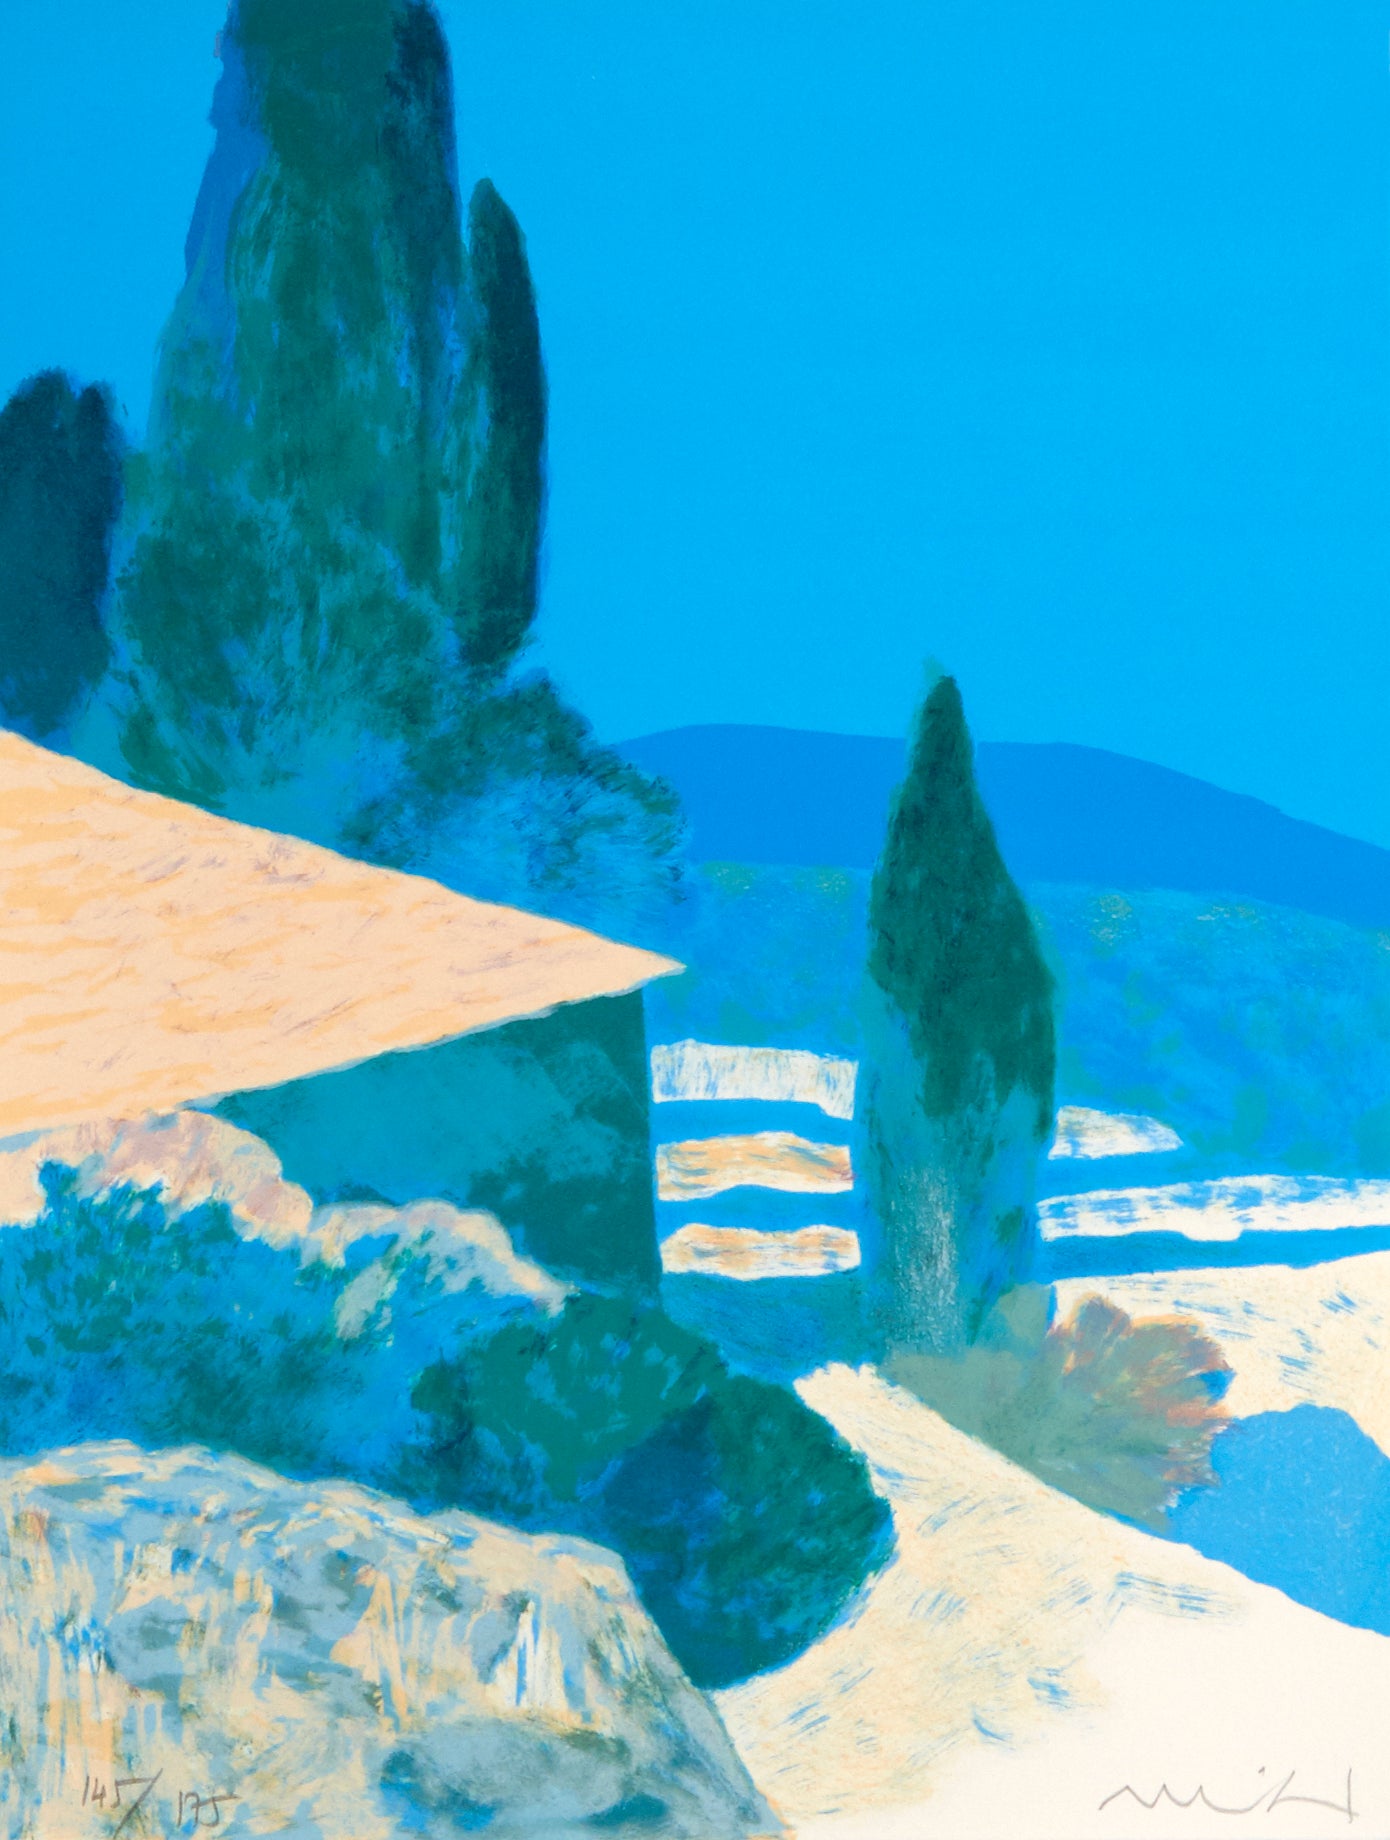 Provence IX From the Portfolio "Provence" by Roger Mühl, 1986 - Mourlot Editions - Fine_Art - Poster - Lithograph - Wall Art - Vintage - Prints - Original